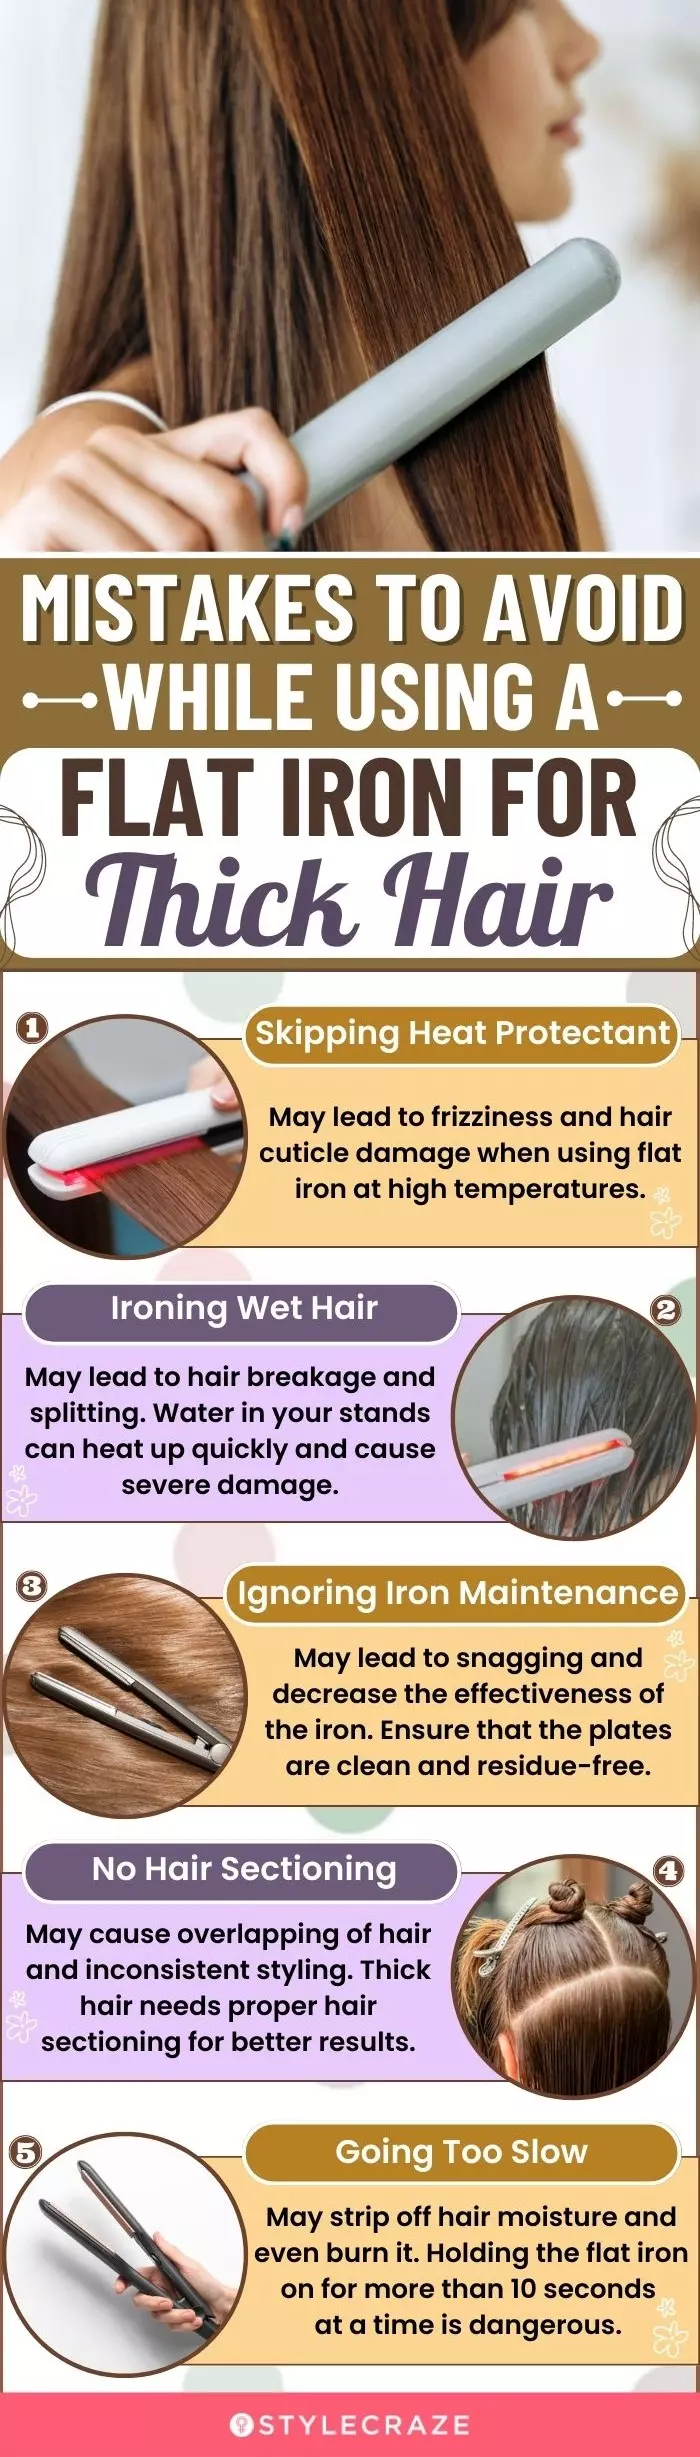 Mistakes To Avoid While Using A Flat Iron For Thick Hair (infographic)